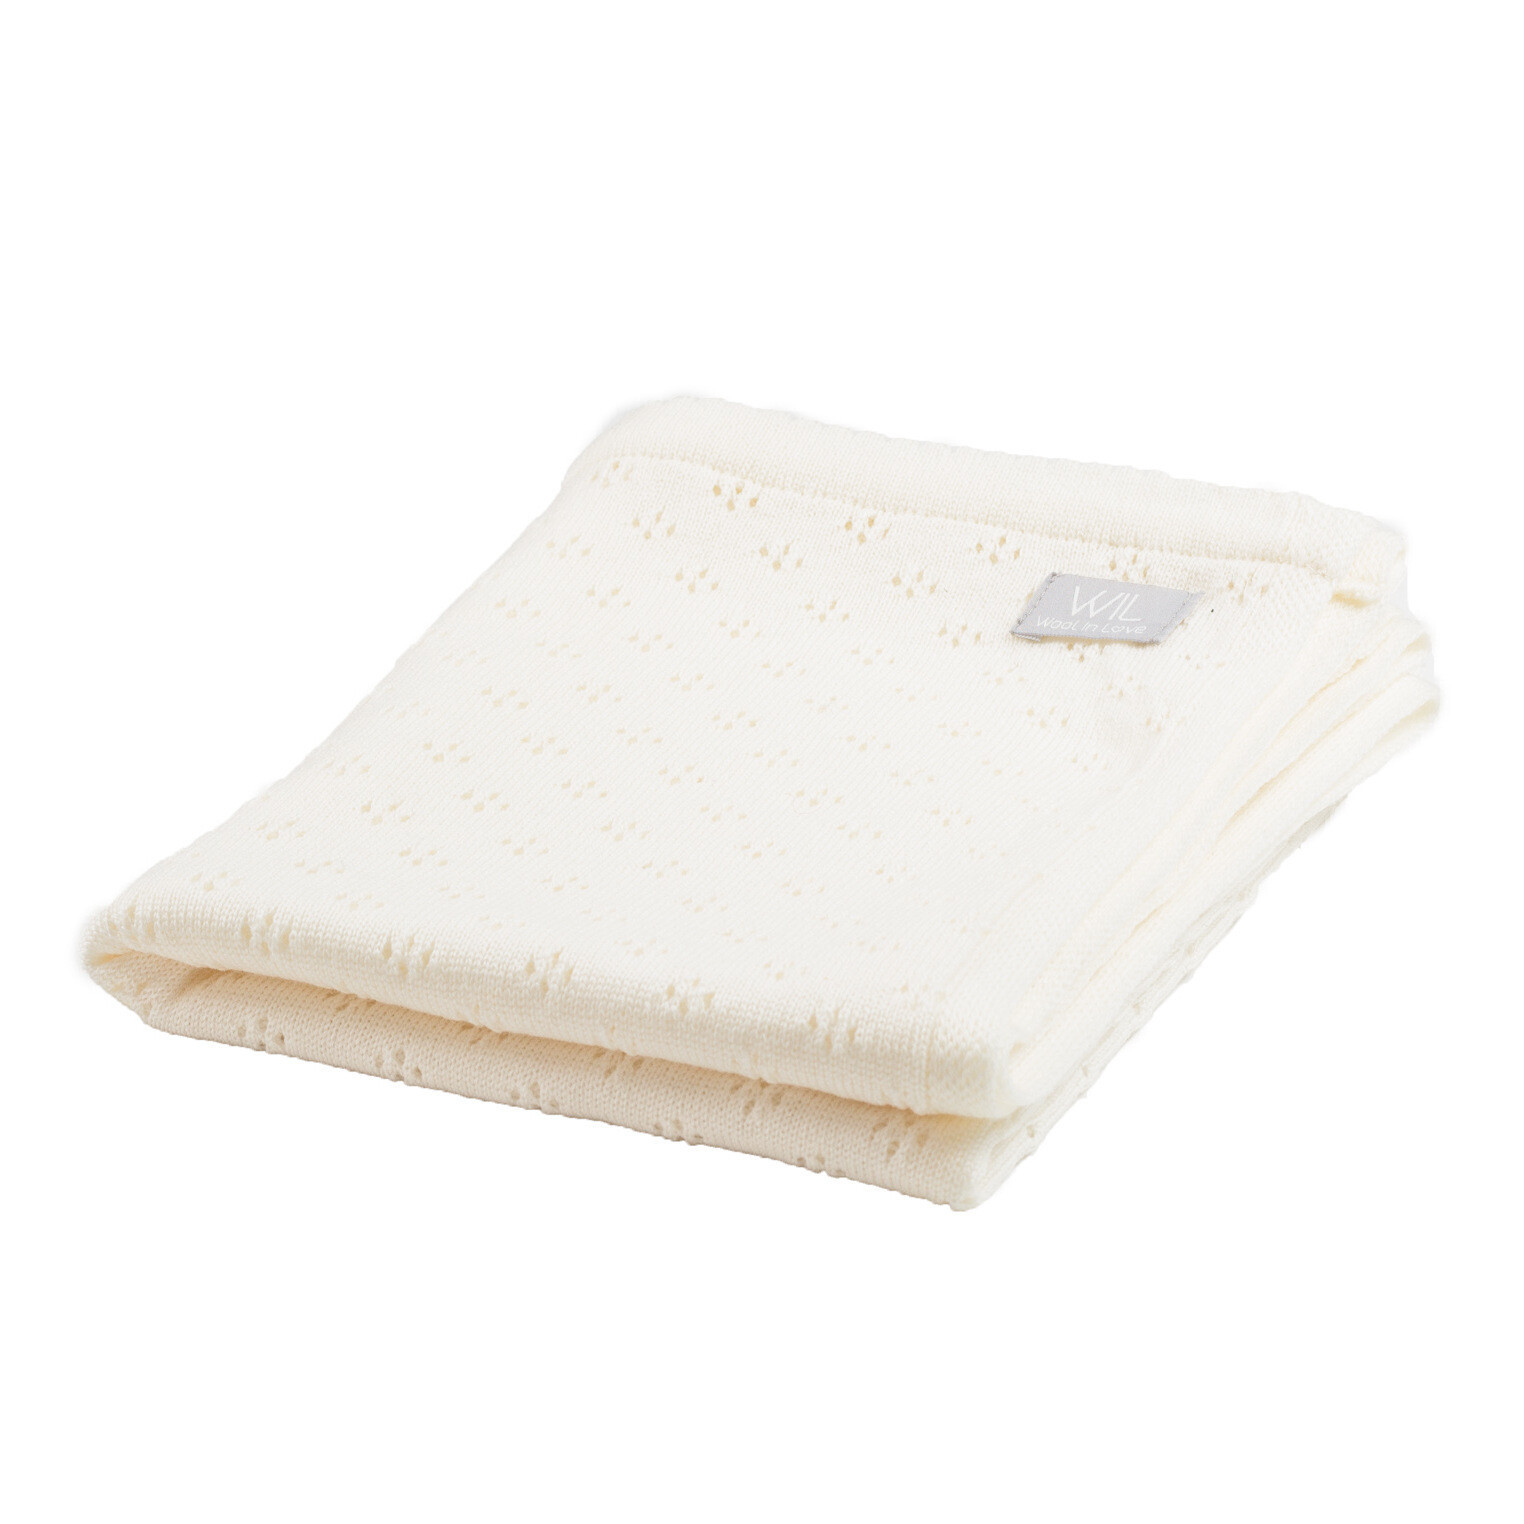 This merino wool baby blanket is a beautiful and lightweight blanket, with is a gentle flowery pattern. 